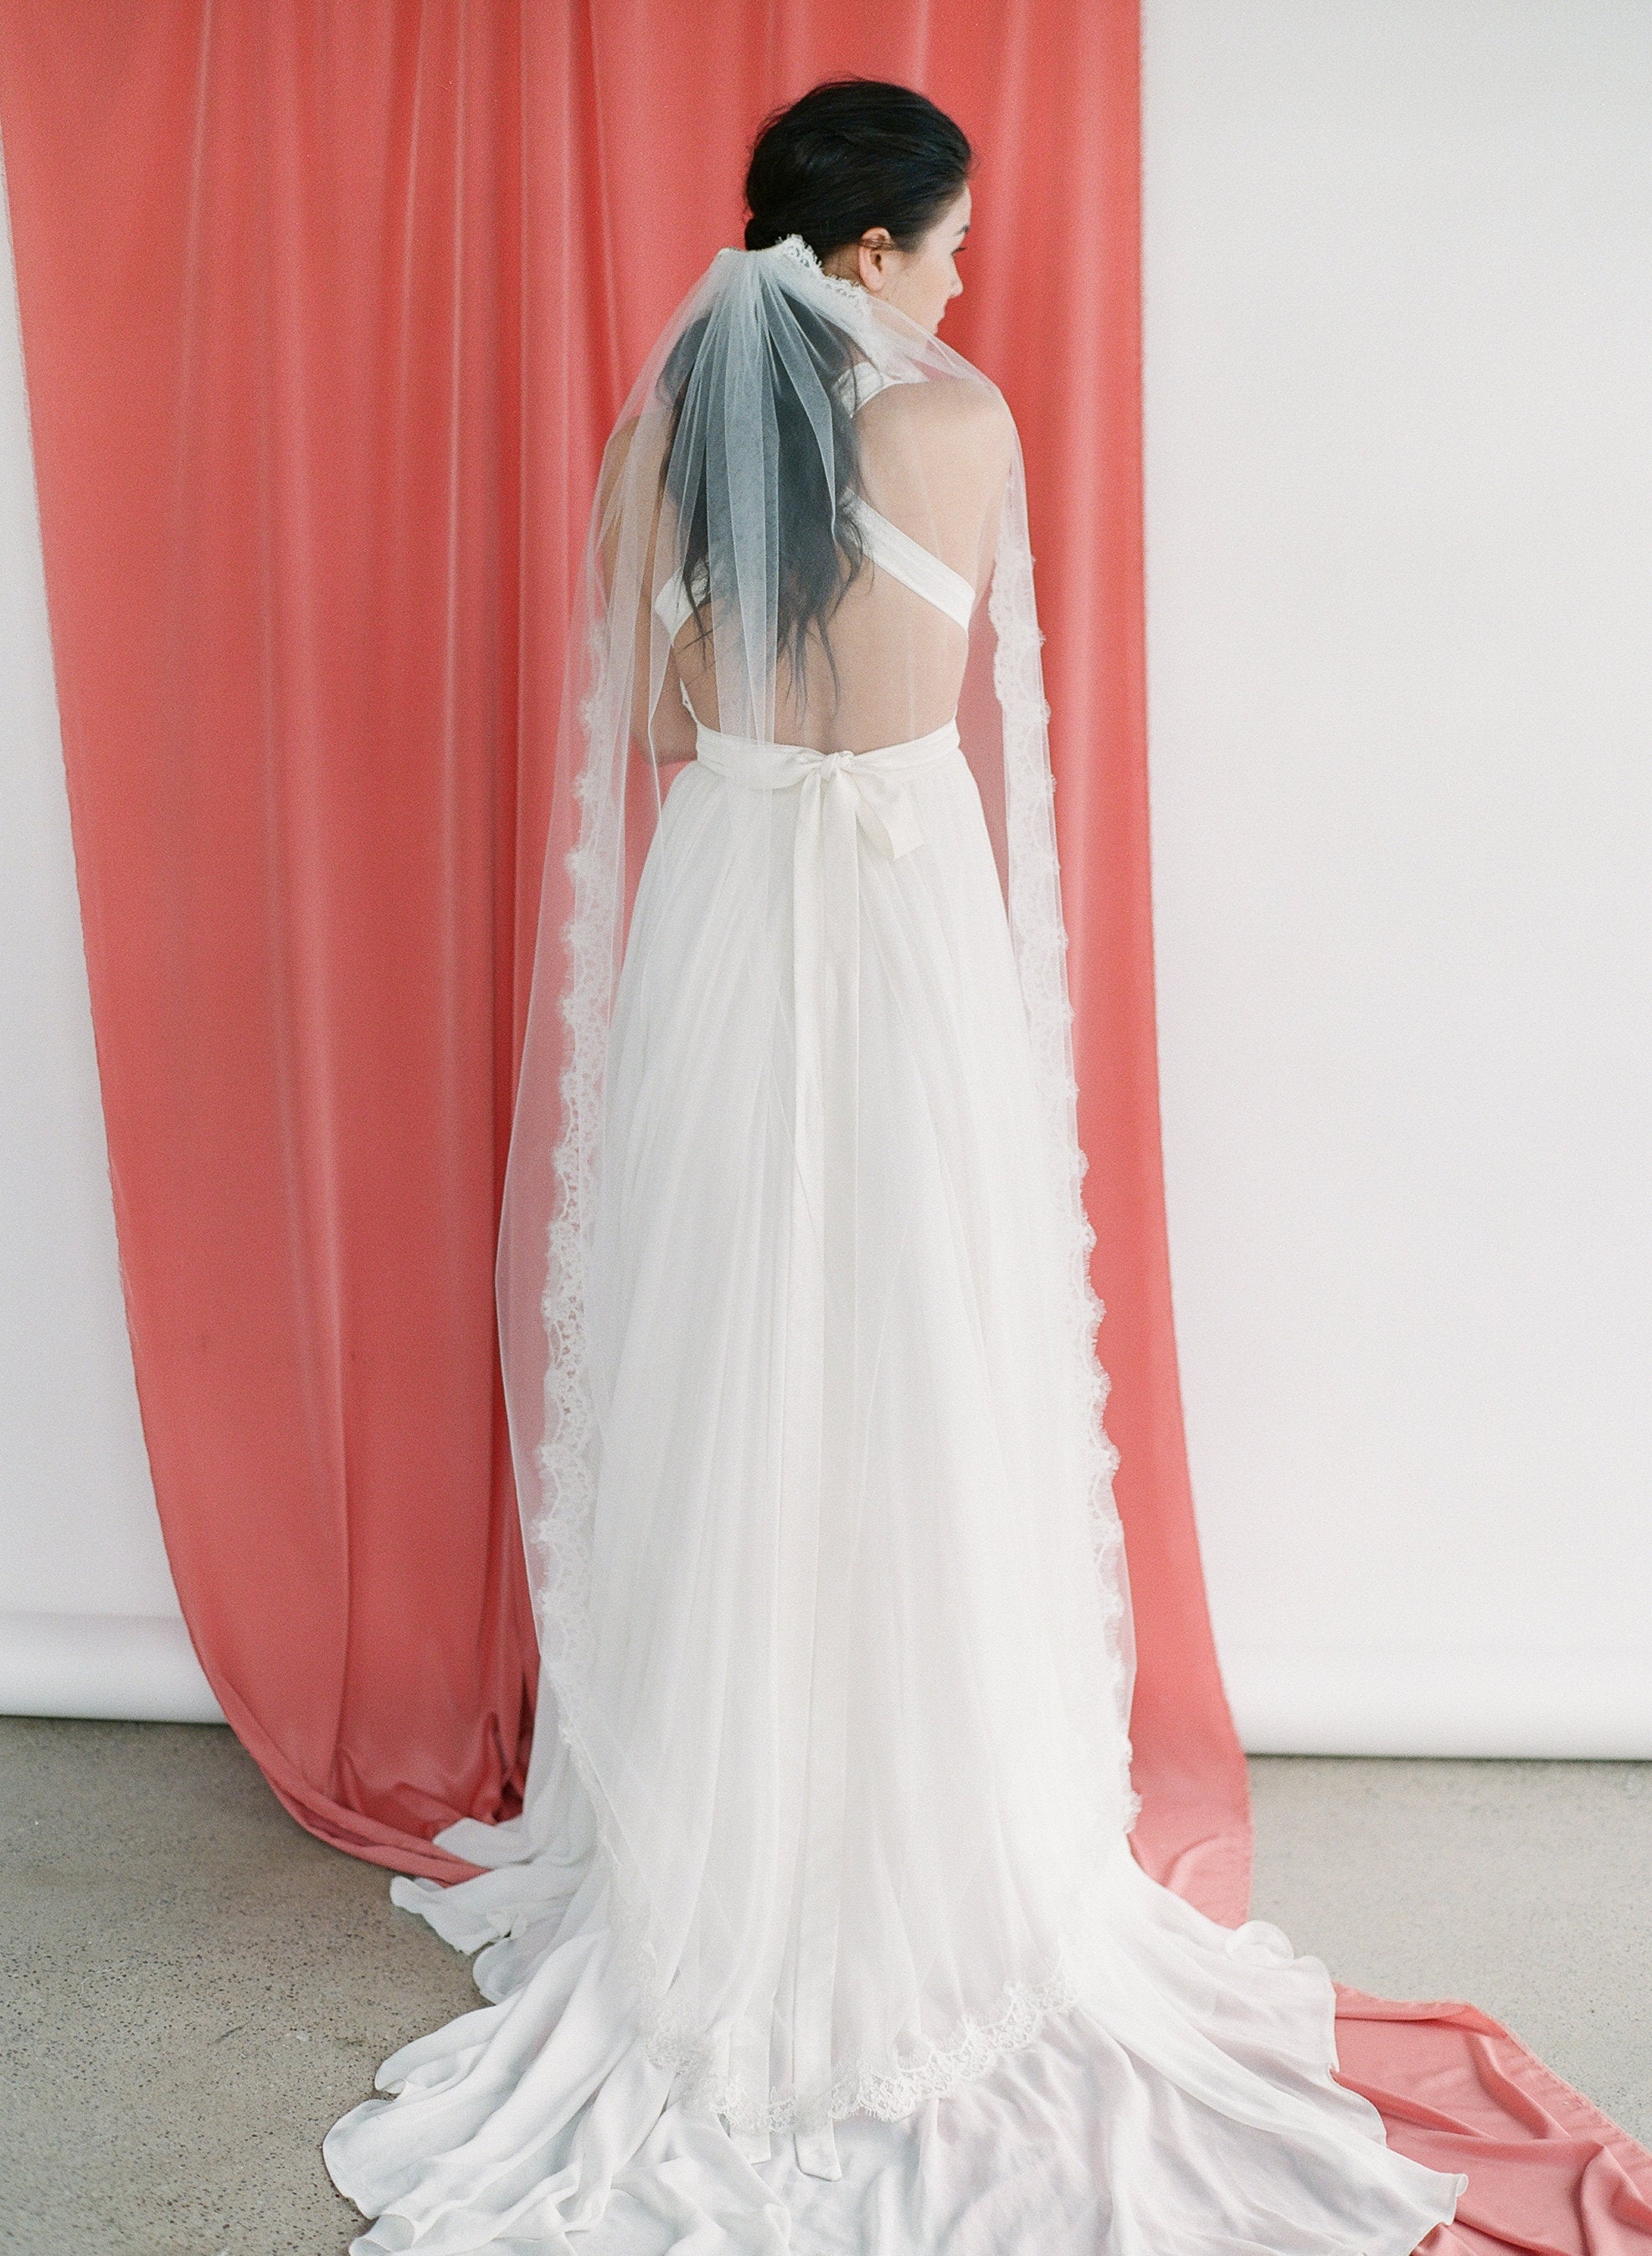 Delicate tulle veil with a French lace trim